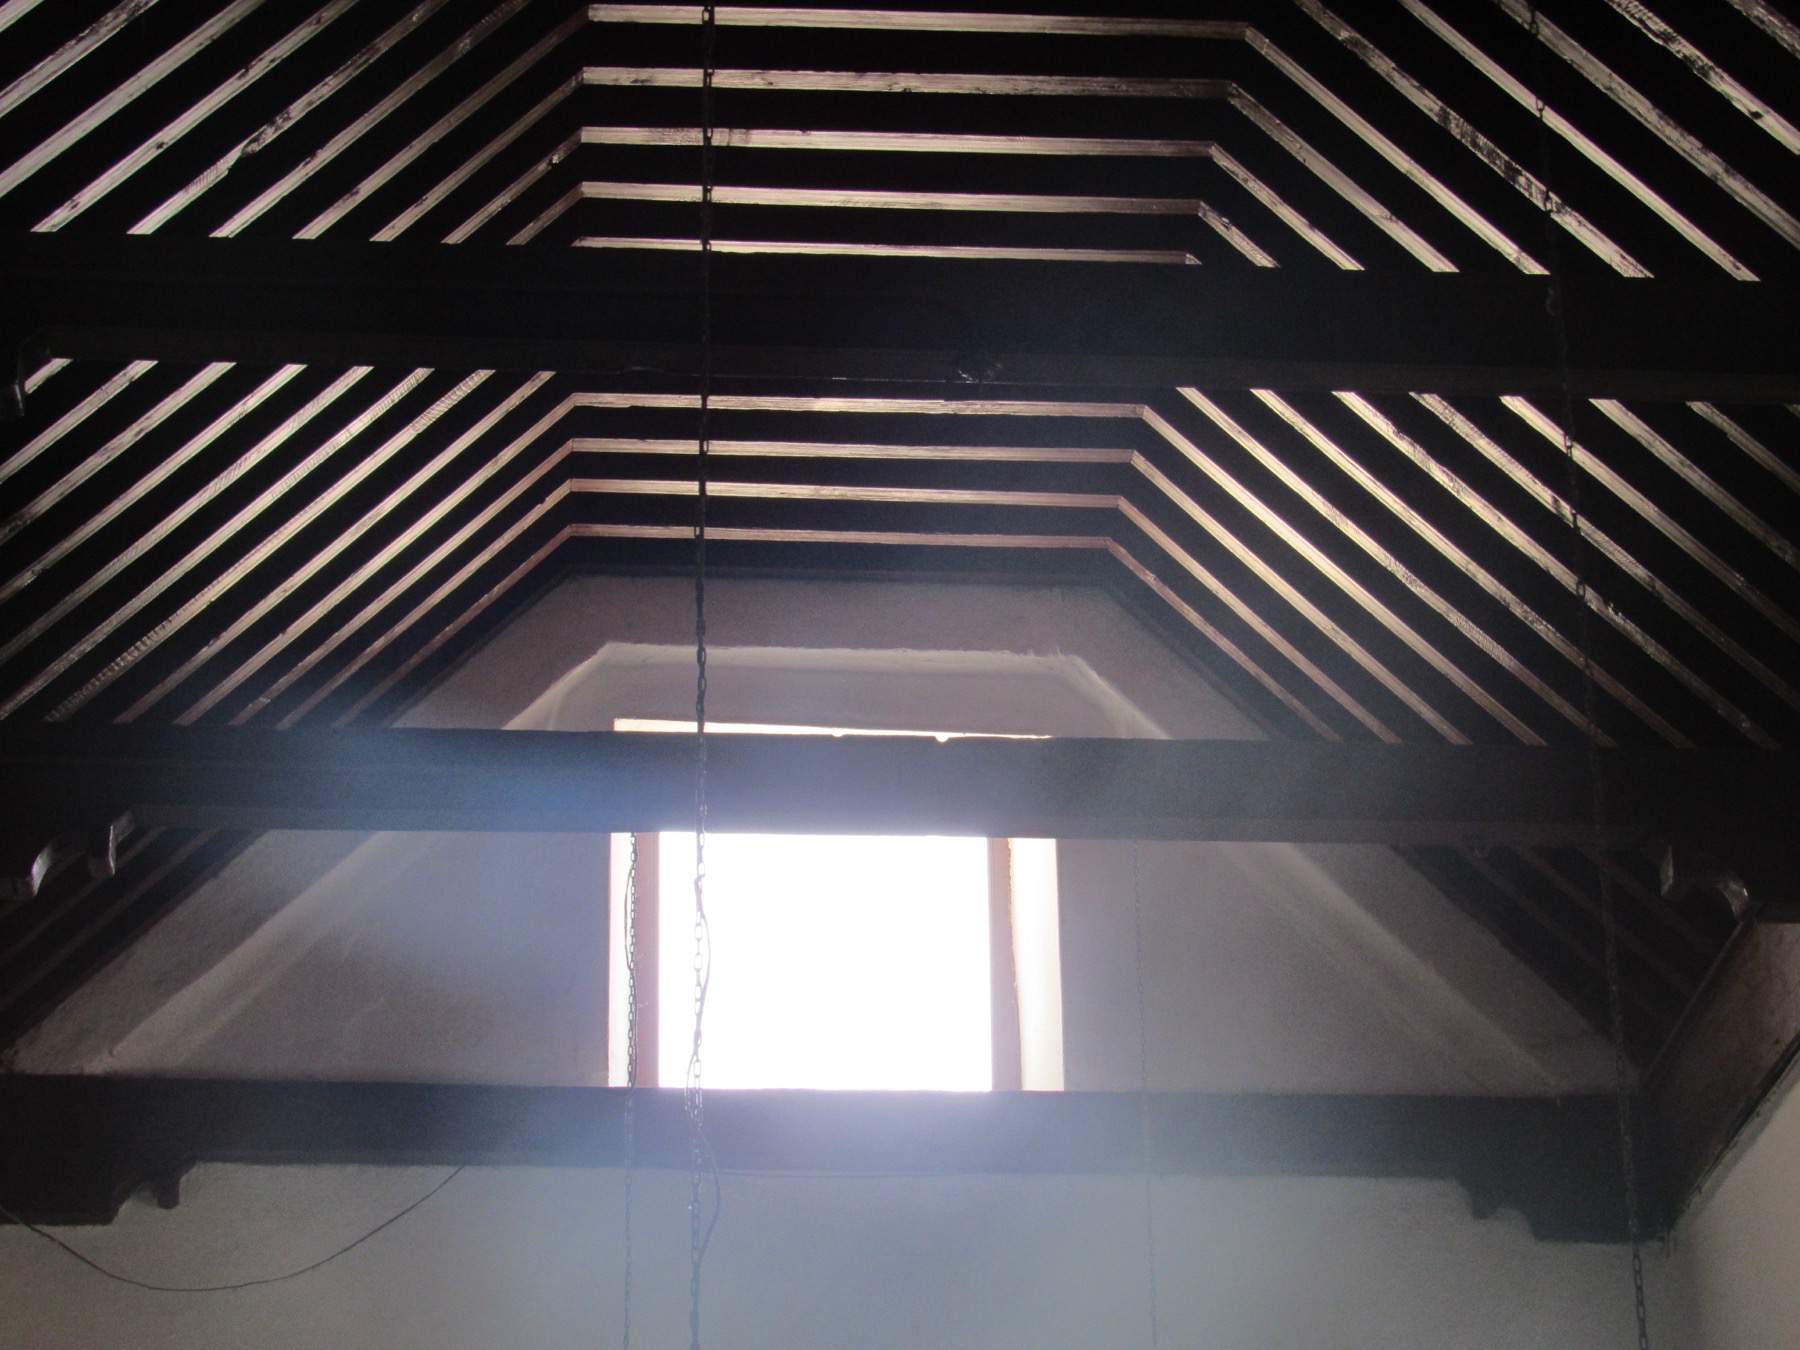 Interior view of ceiling and rafters